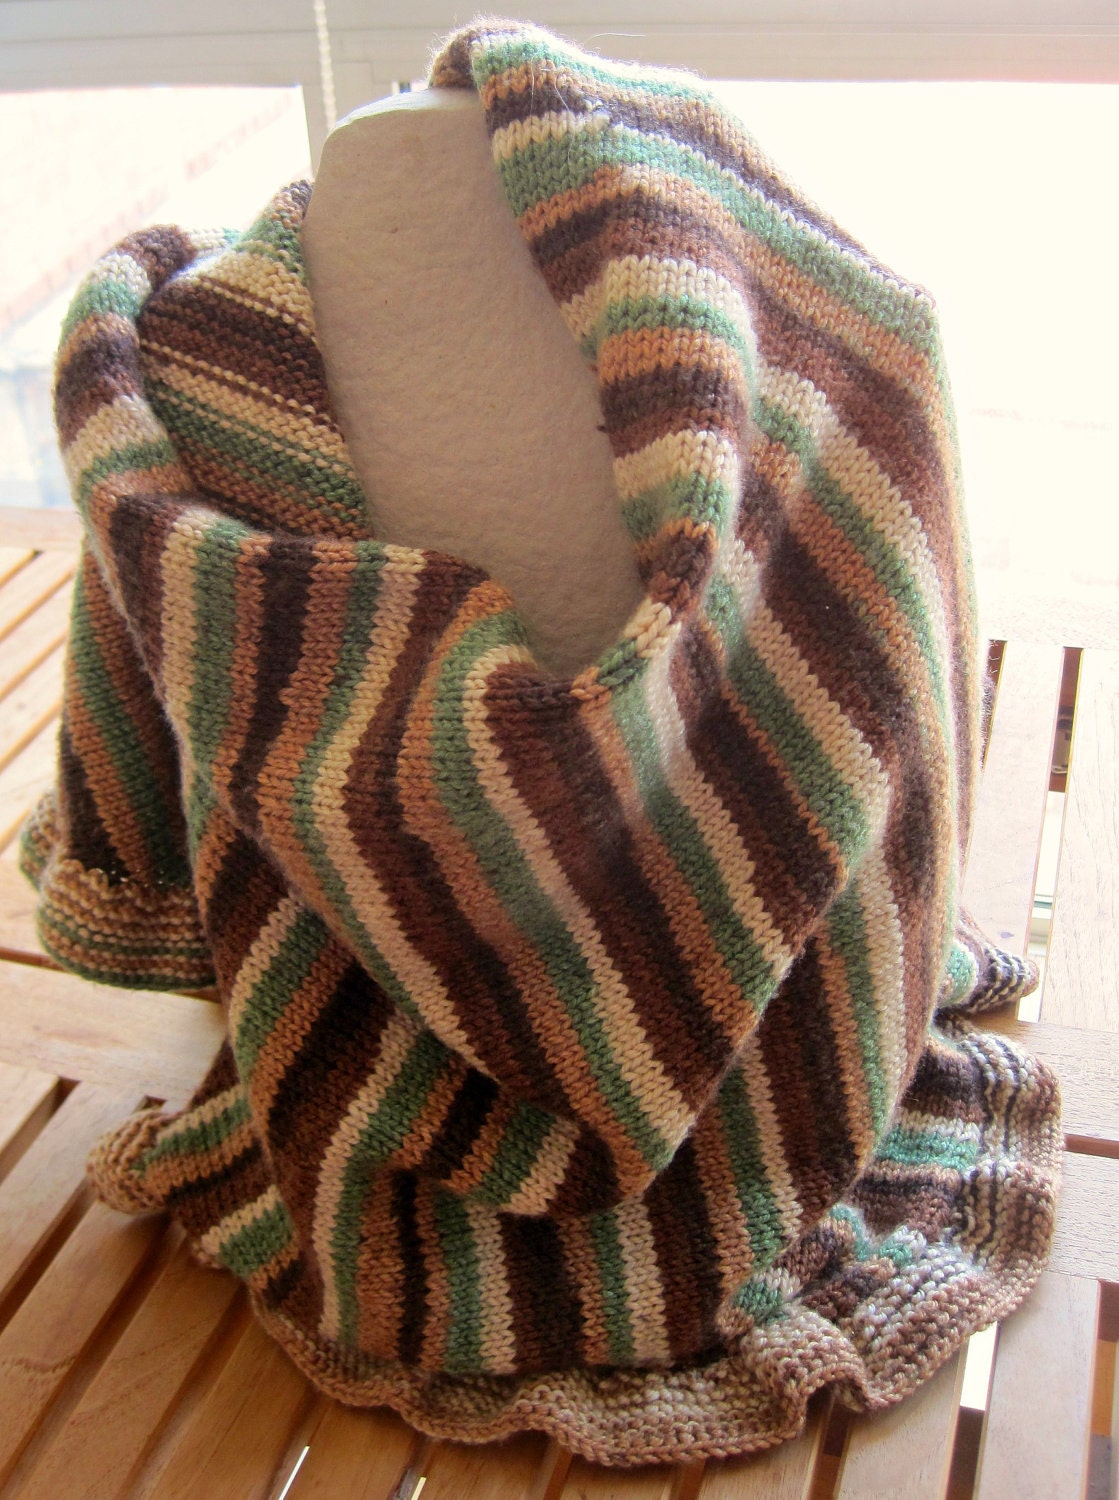 Handmade knitted shawl, striped in brown, green and beige colors - YanasKnitting